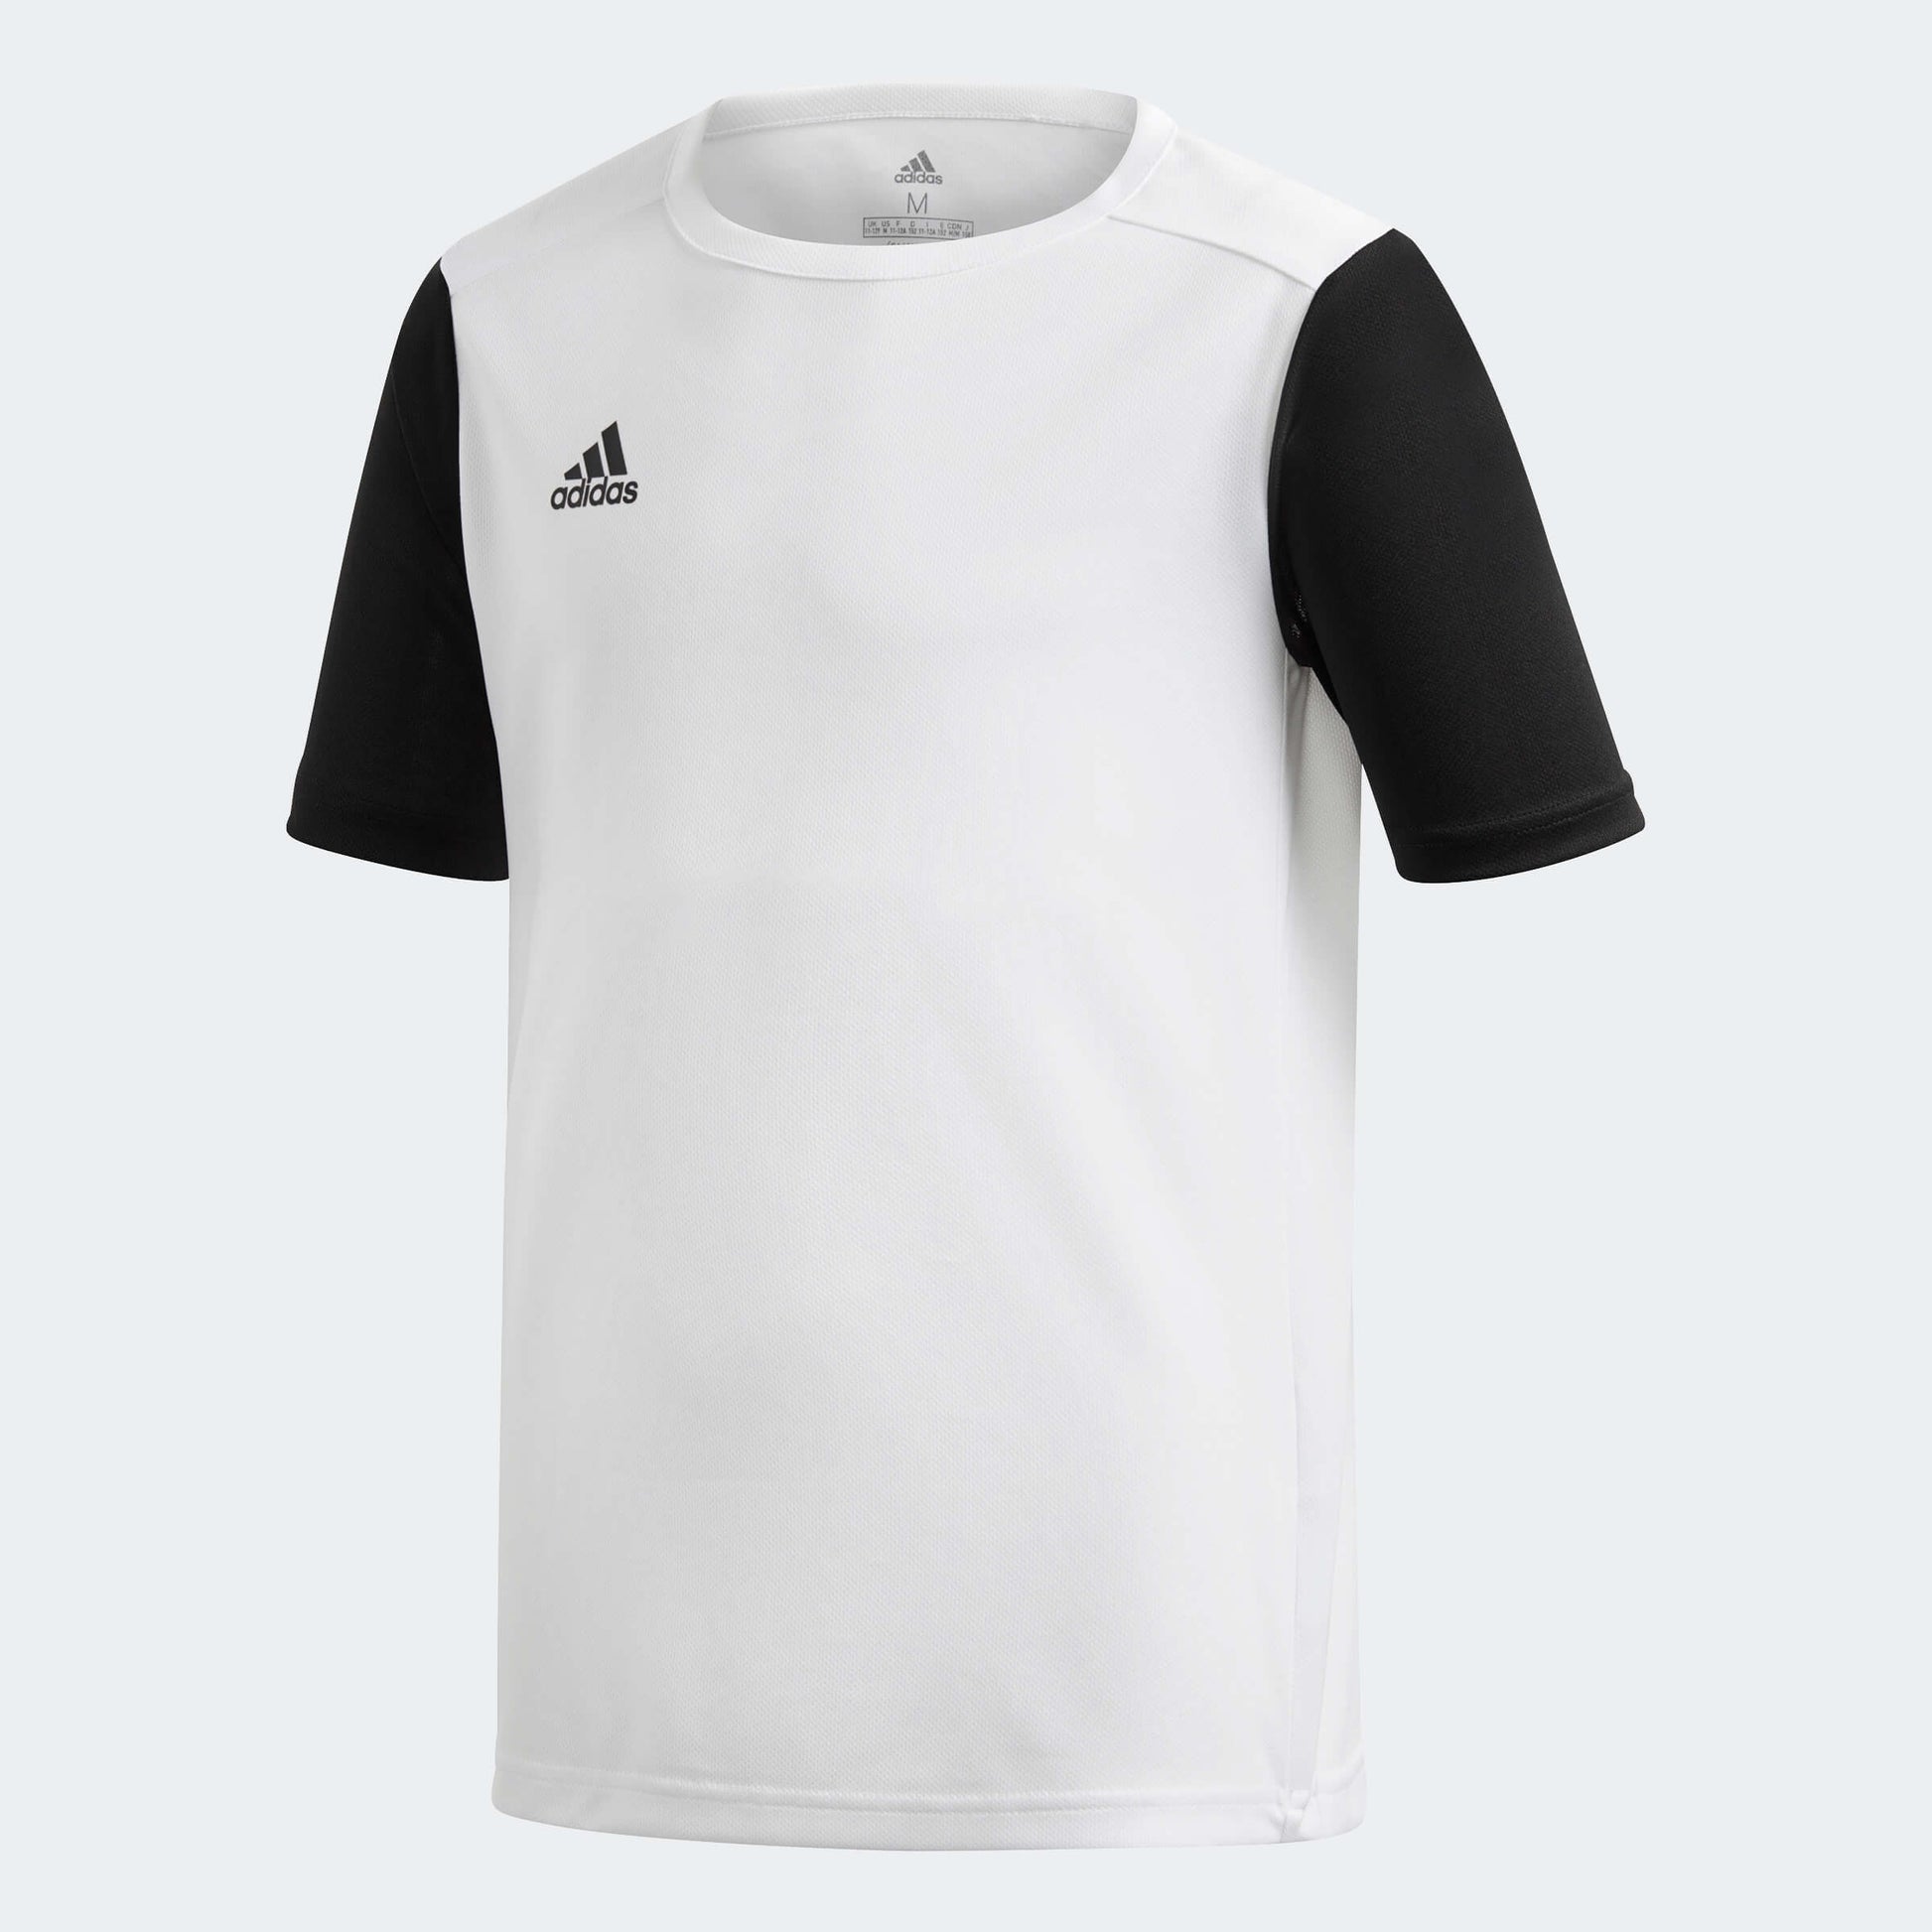 adidas YOUTH Estro 19 Jersey White-Black (Front)